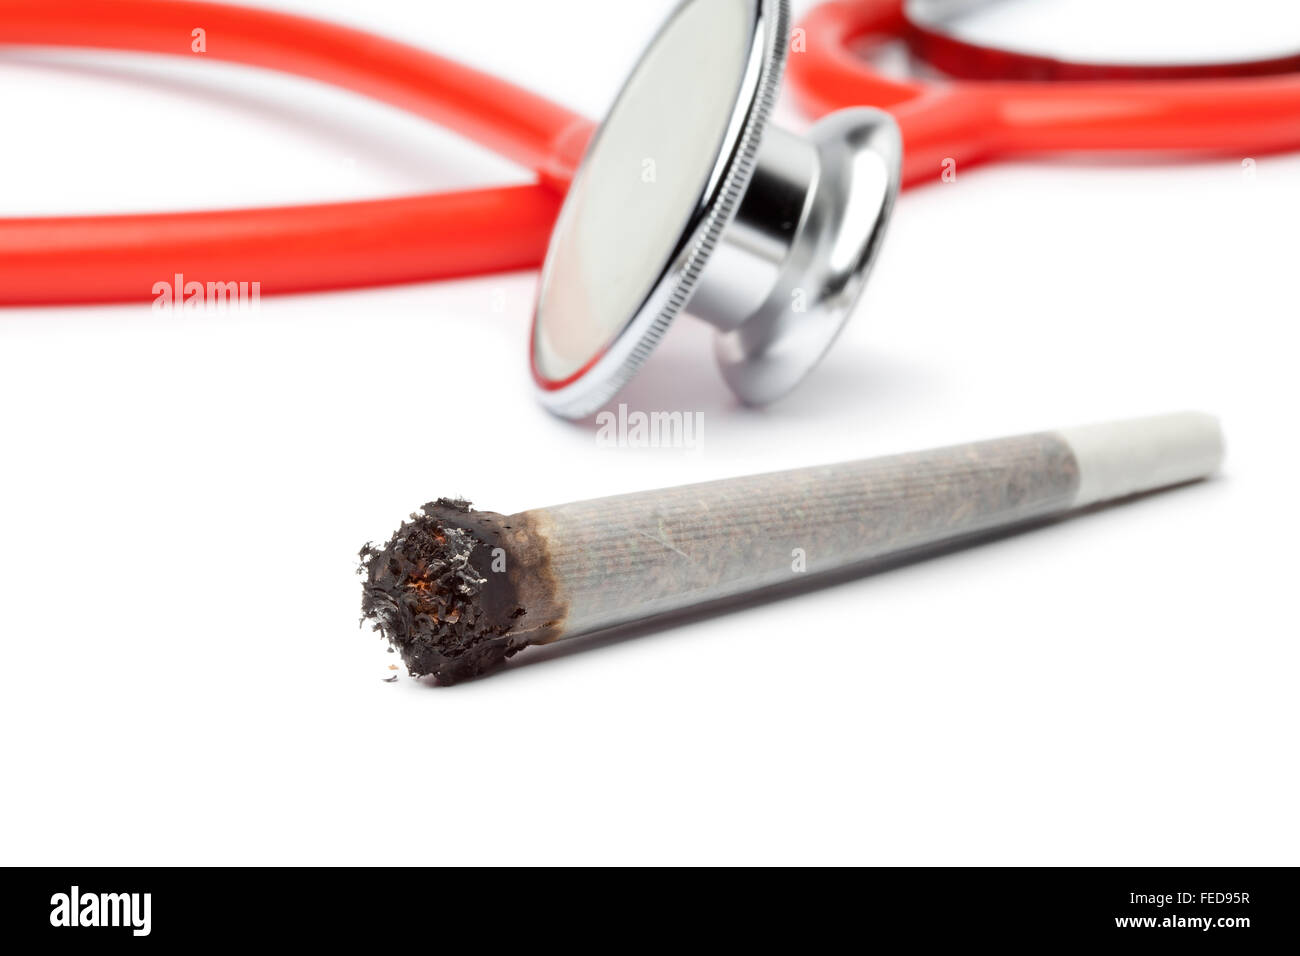 Lit reefer with stethoscope out of focus on background Stock Photo